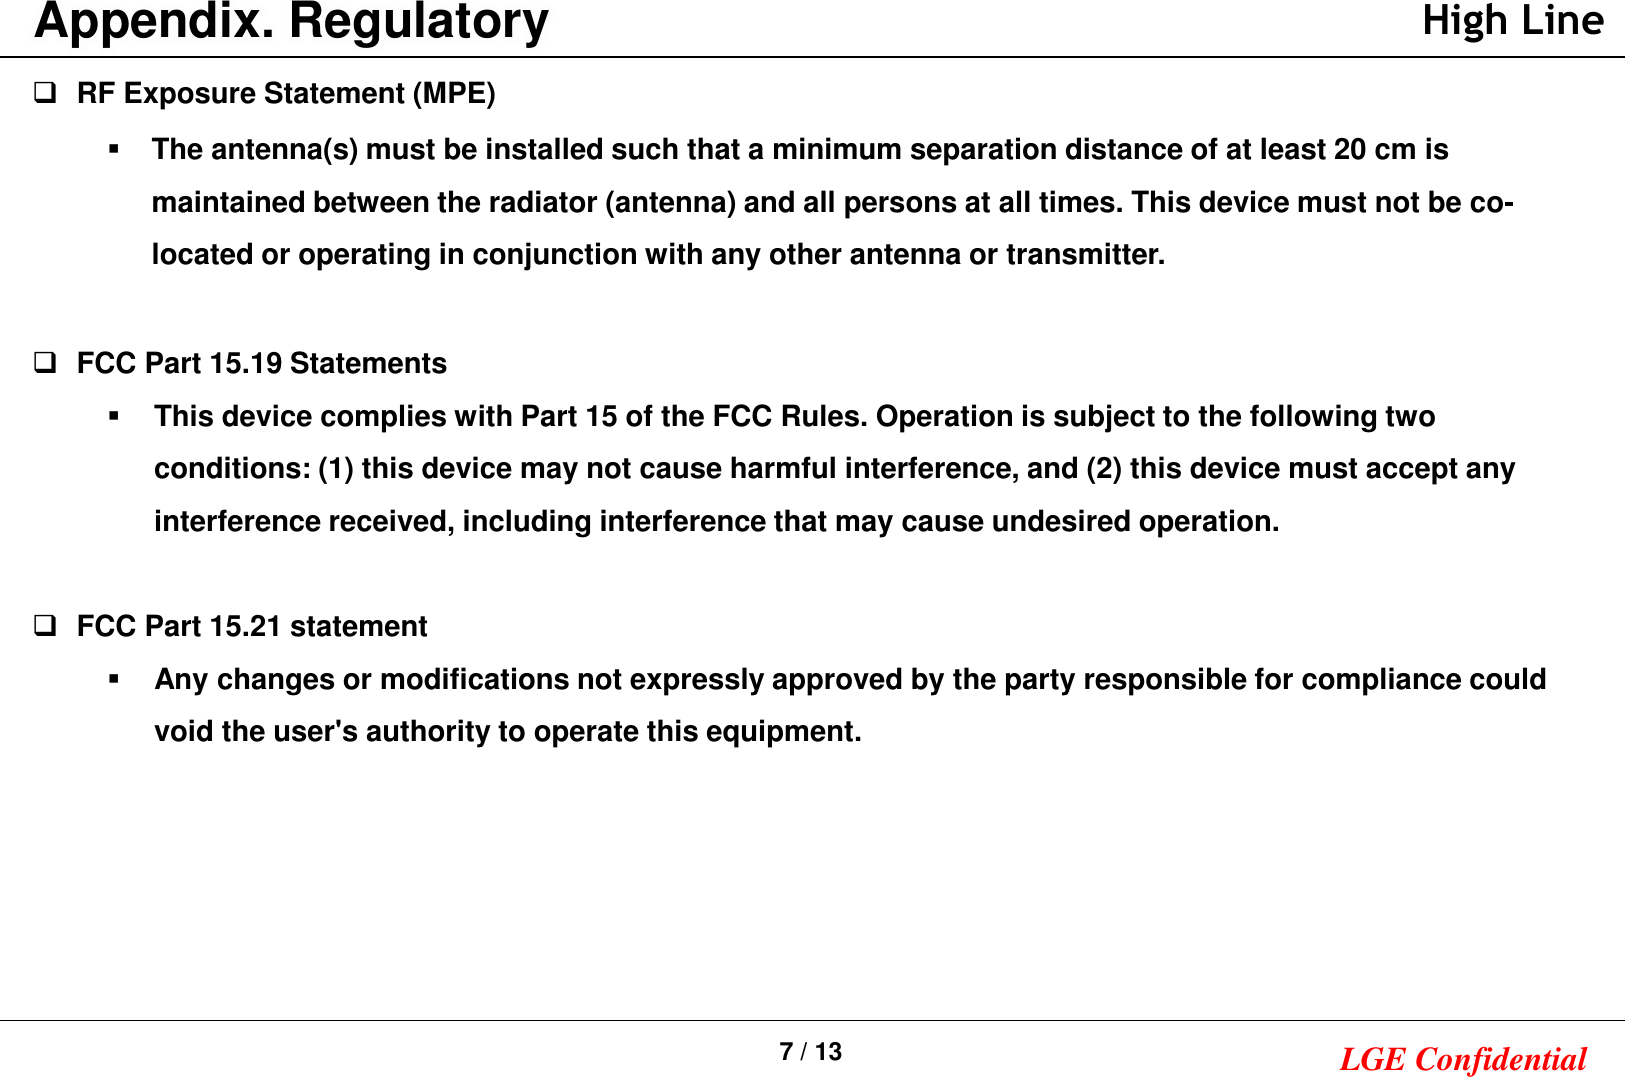 7 / 13 LGE ConfidentialAppendix. RegulatoryRF Exposure Statement (MPE)  The antenna(s) must be installed such that a minimum separation distance of at least 20 cm is maintained between the radiator (antenna) and all persons at all times. This device must not be co-located or operating in conjunction with any other antenna or transmitter.FCC Part 15.19 StatementsThis device complies with Part 15 of the FCC Rules. Operation is subject to the following two conditions: (1) this device may not cause harmful interference, and (2) this device must accept any interference received, including interference that may cause undesired operation.FCC Part 15.21 statementAny changes or modifications not expressly approved by the party responsible for compliance could void the user&apos;s authority to operate this equipment.High Line